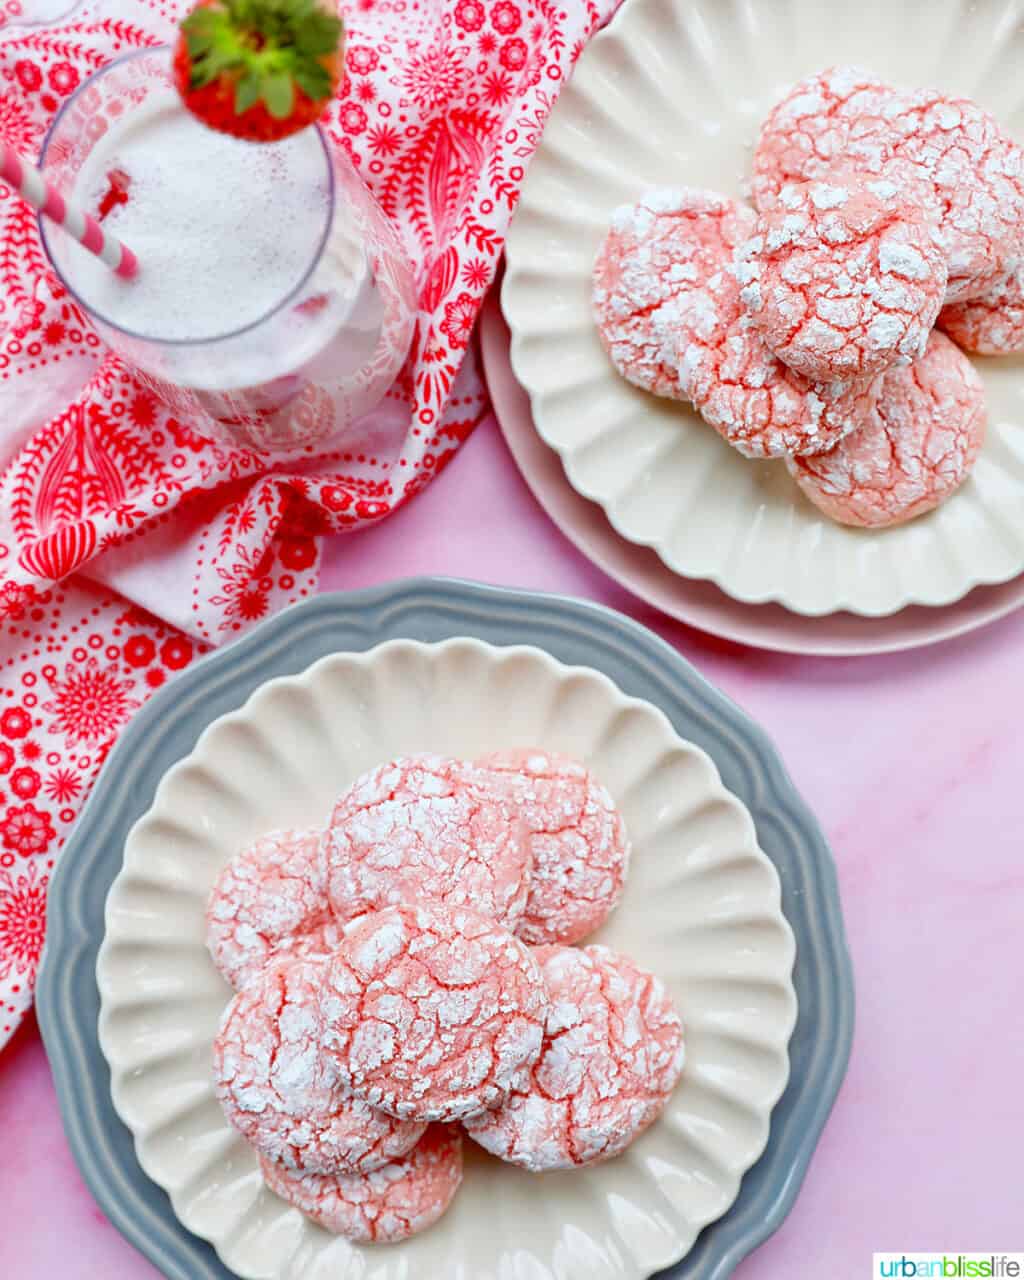 two plates with stacks of strawberry crinkle cookies and glass of strawberry milk